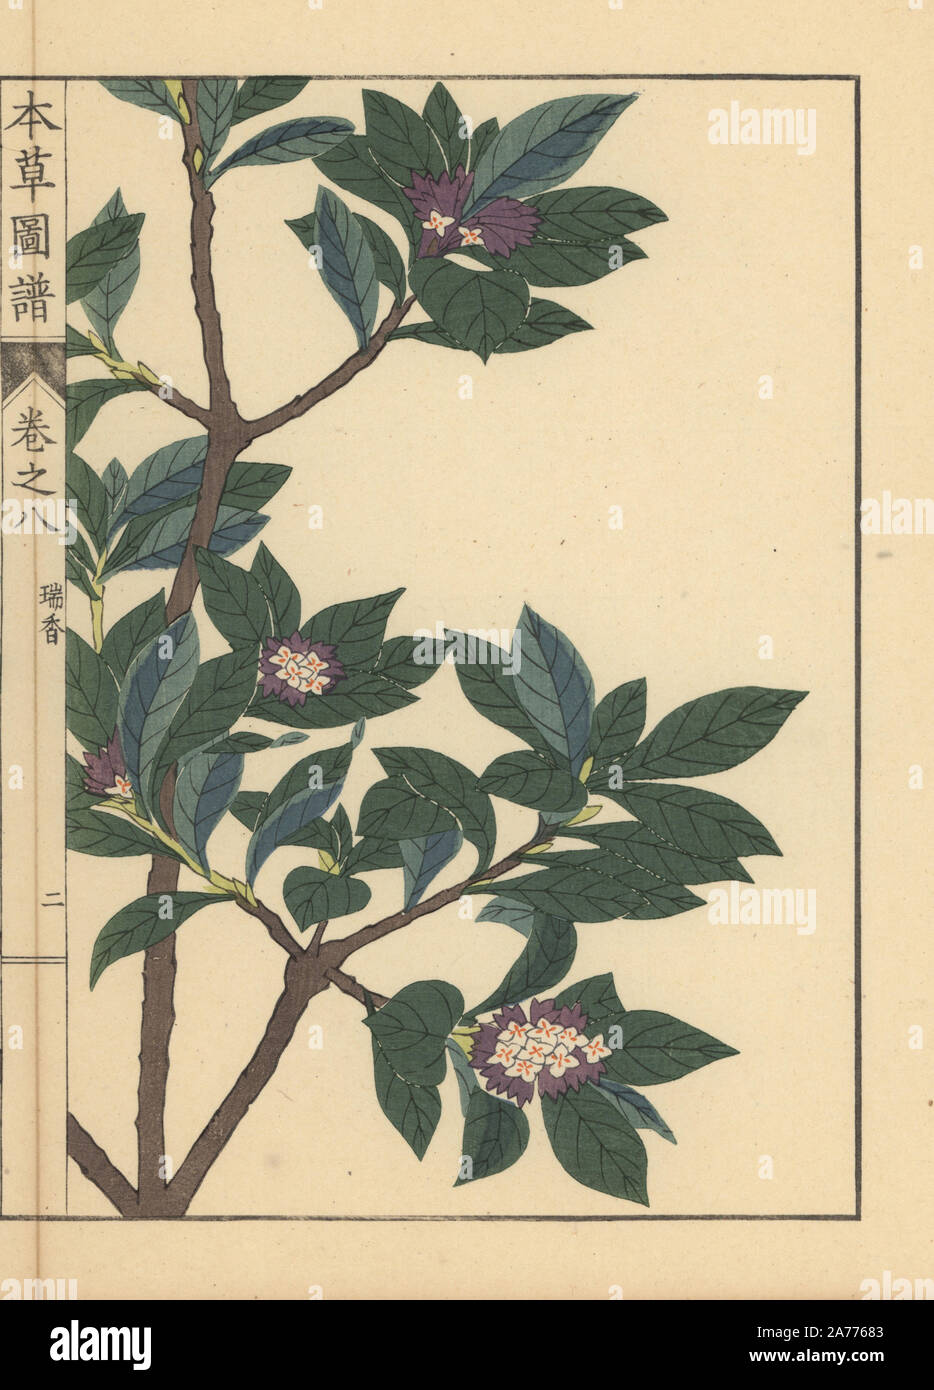 Winter daphne, Daphne odora Thunb. Colour-printed woodblock engraving by Kan'en Iwasaki from "Honzo Zufu," an Illustrated Guide to Medicinal Plants, Japan, 1884. Iwasaki (1786-1842) was a Japanese botanist, entomologist and zoologist. He was one of the first Japanese botanists to incorporate western knowledge into his studies. Stock Photo